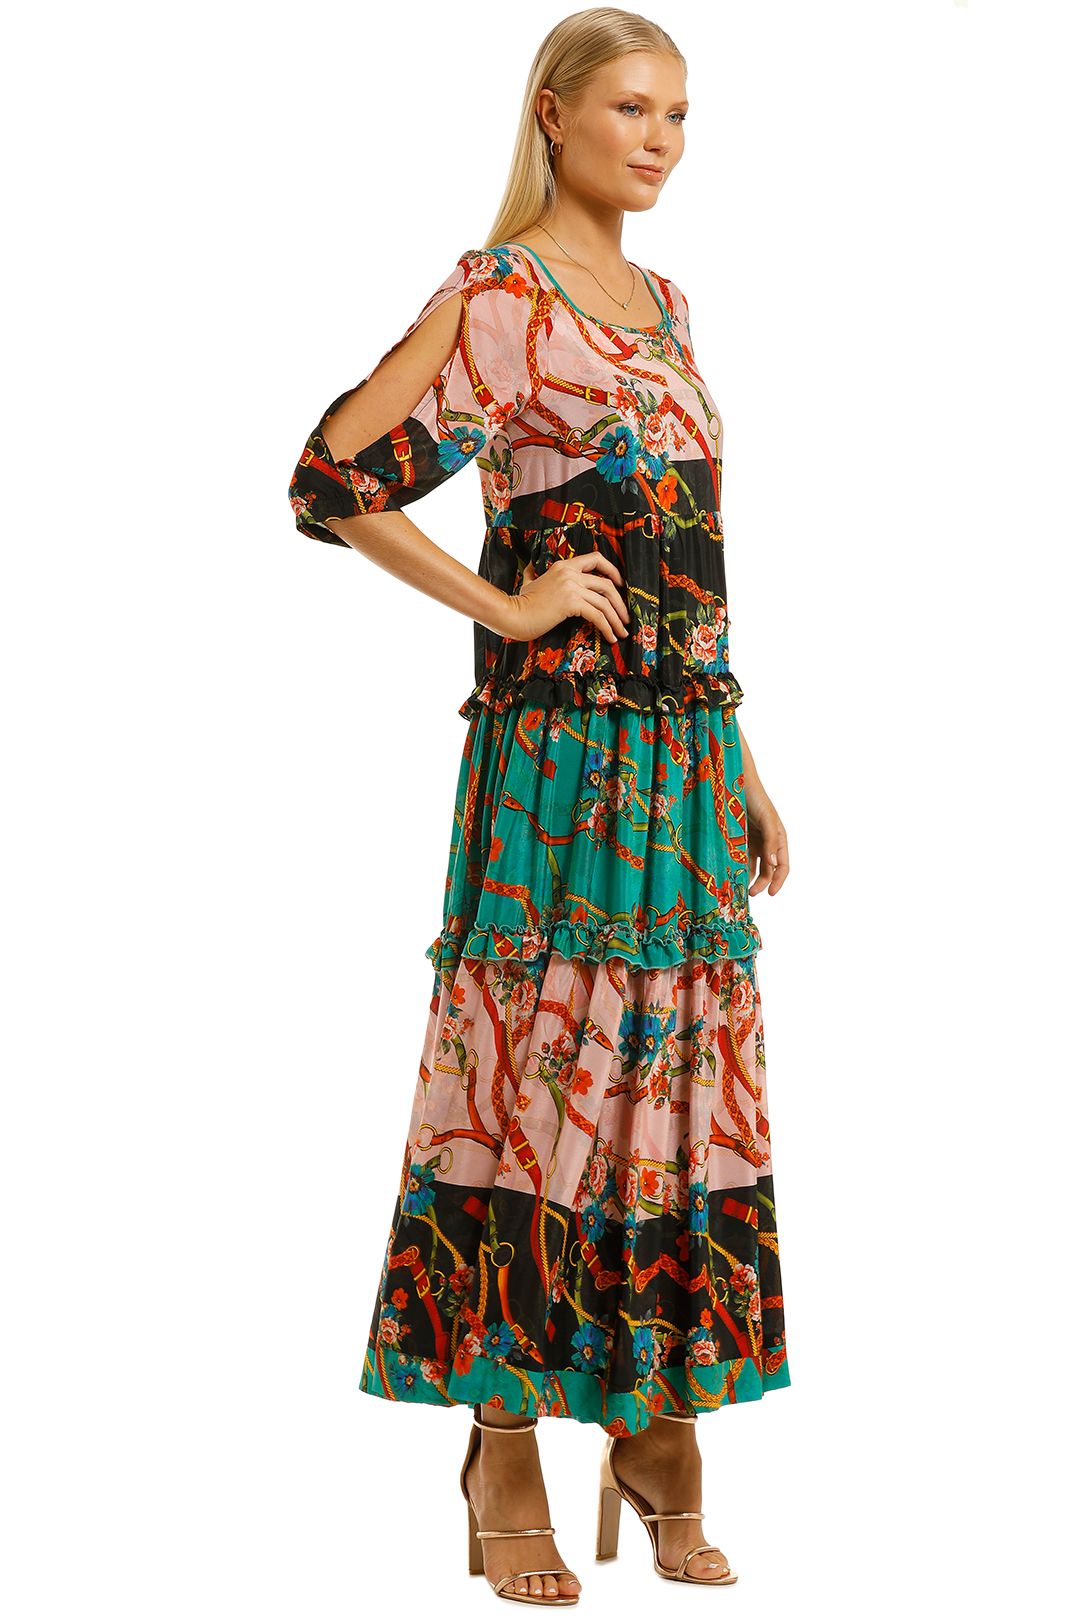 Cooper-By-Trelise-Cooper-Frill-For-All-Dress-Multi Print-Side